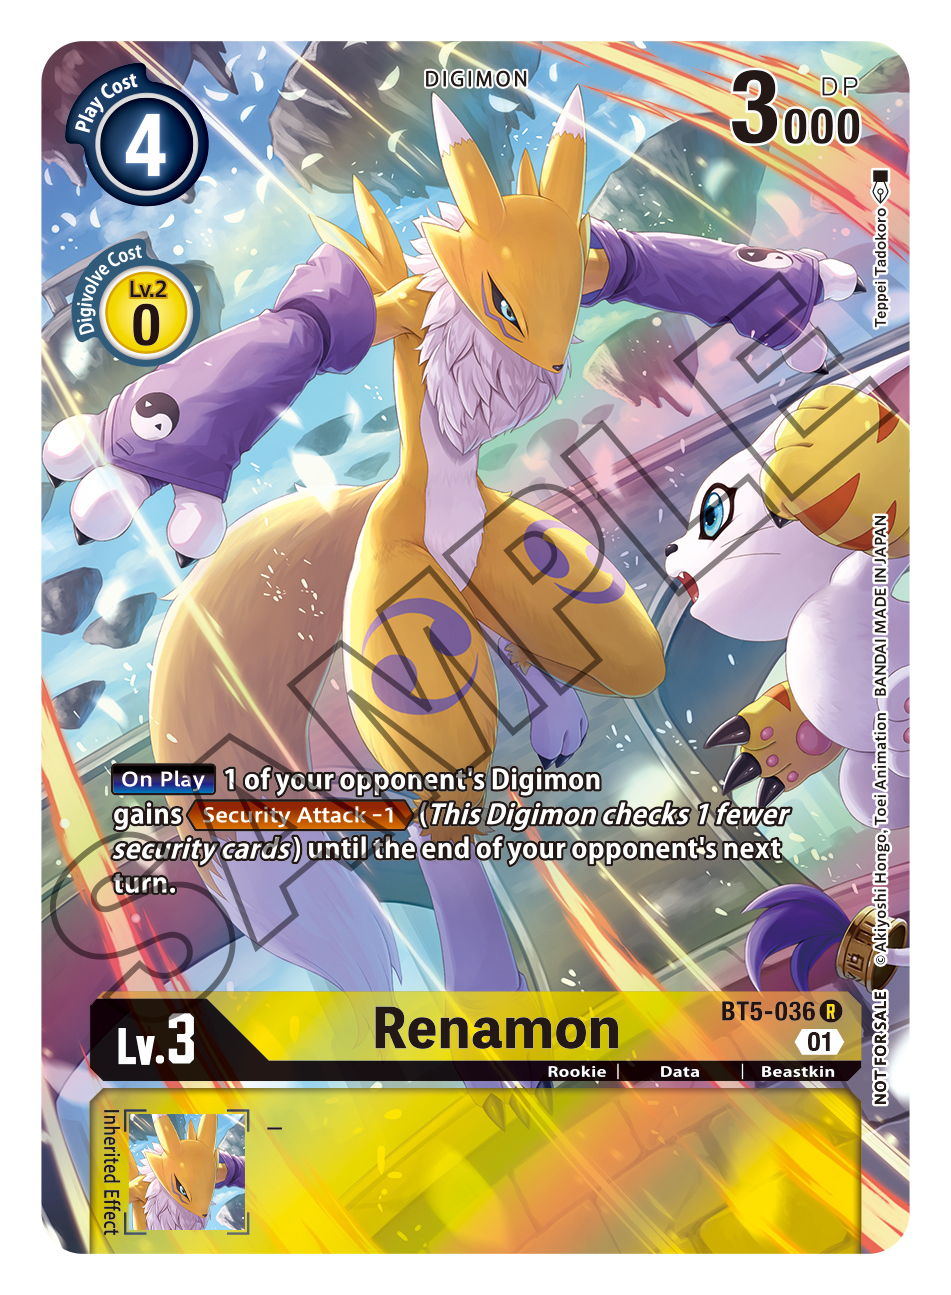 Digimon Card Game Playmat and Card Set 1 -Digimon Tamers- 【September 2022 delivery】